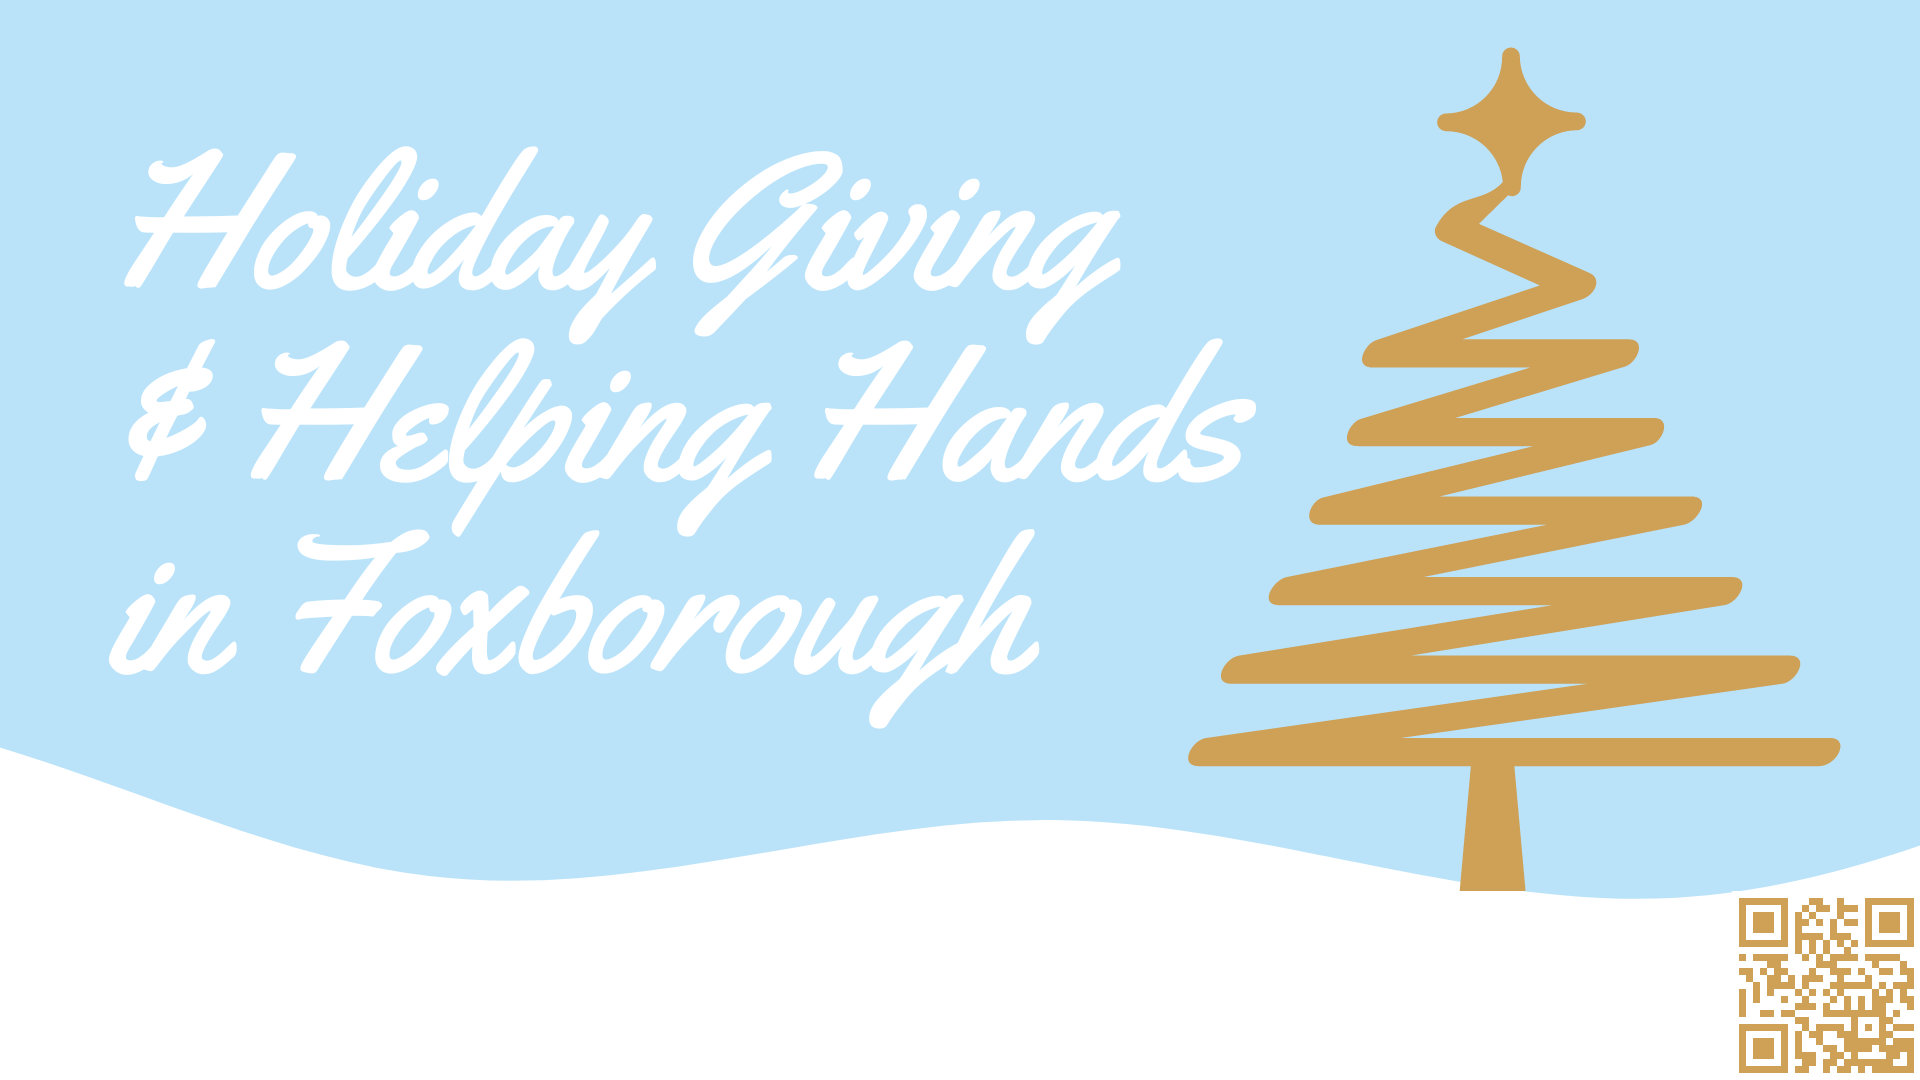 HolidayHelpingHands-02035org.png